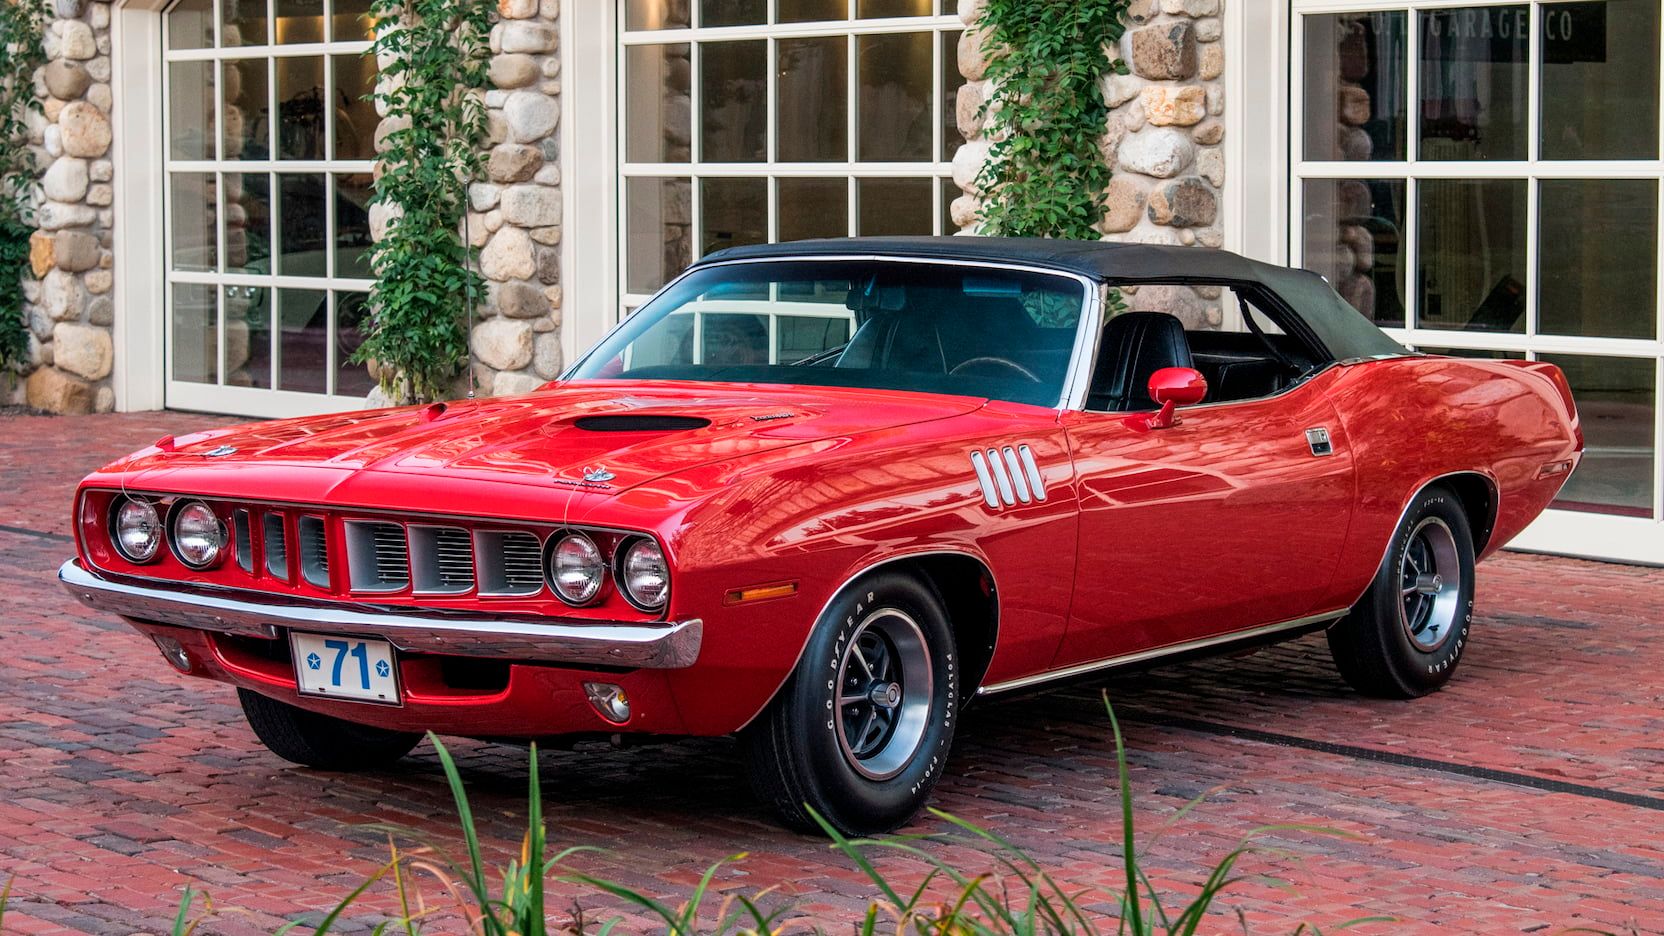 A parked 1971 Plymouth Barracuda convertible